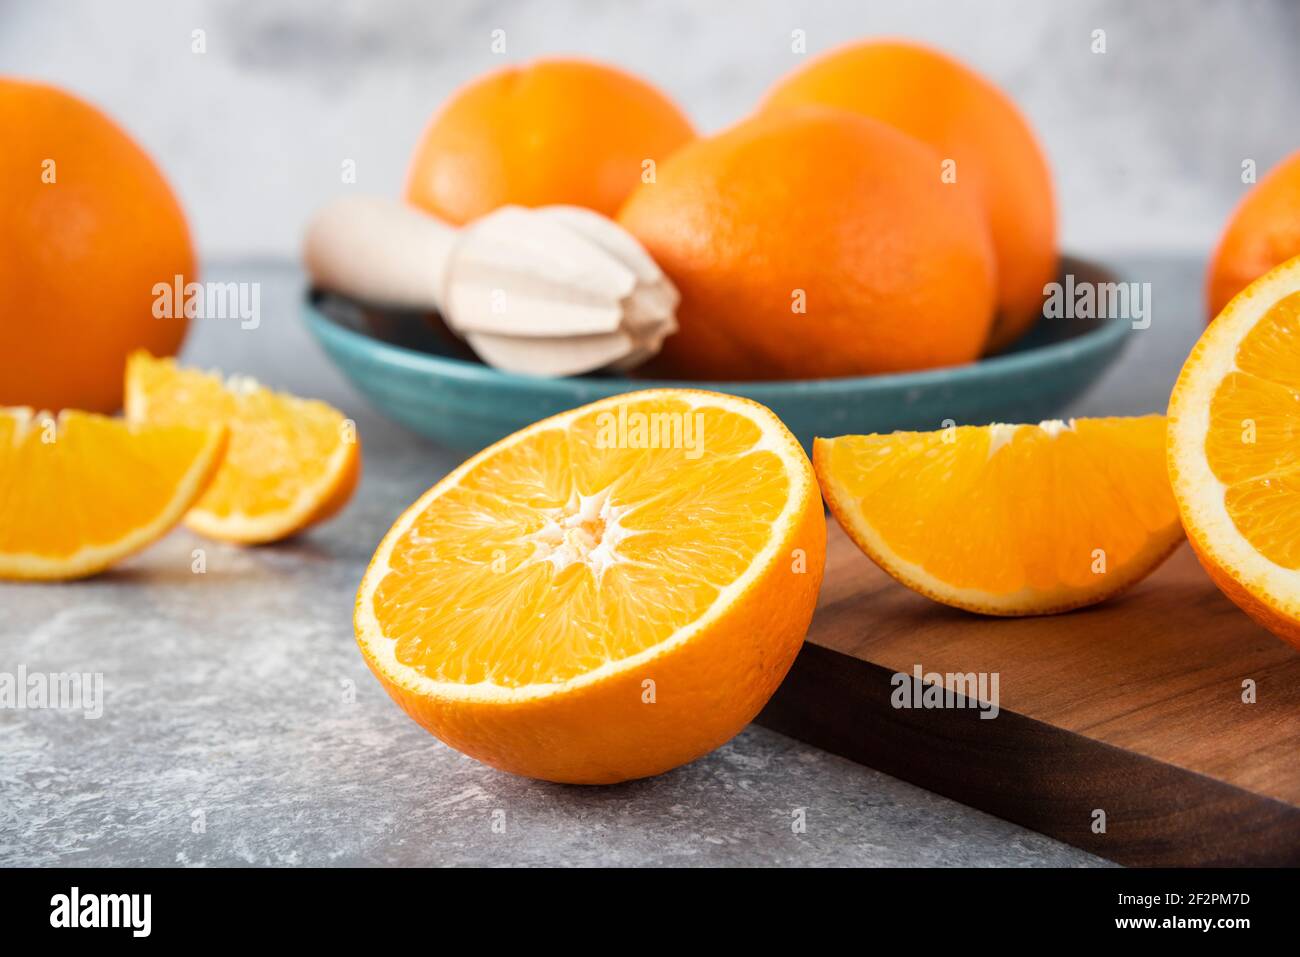 Sliced orange fruits with whole oranges on a wooden board Stock Photo